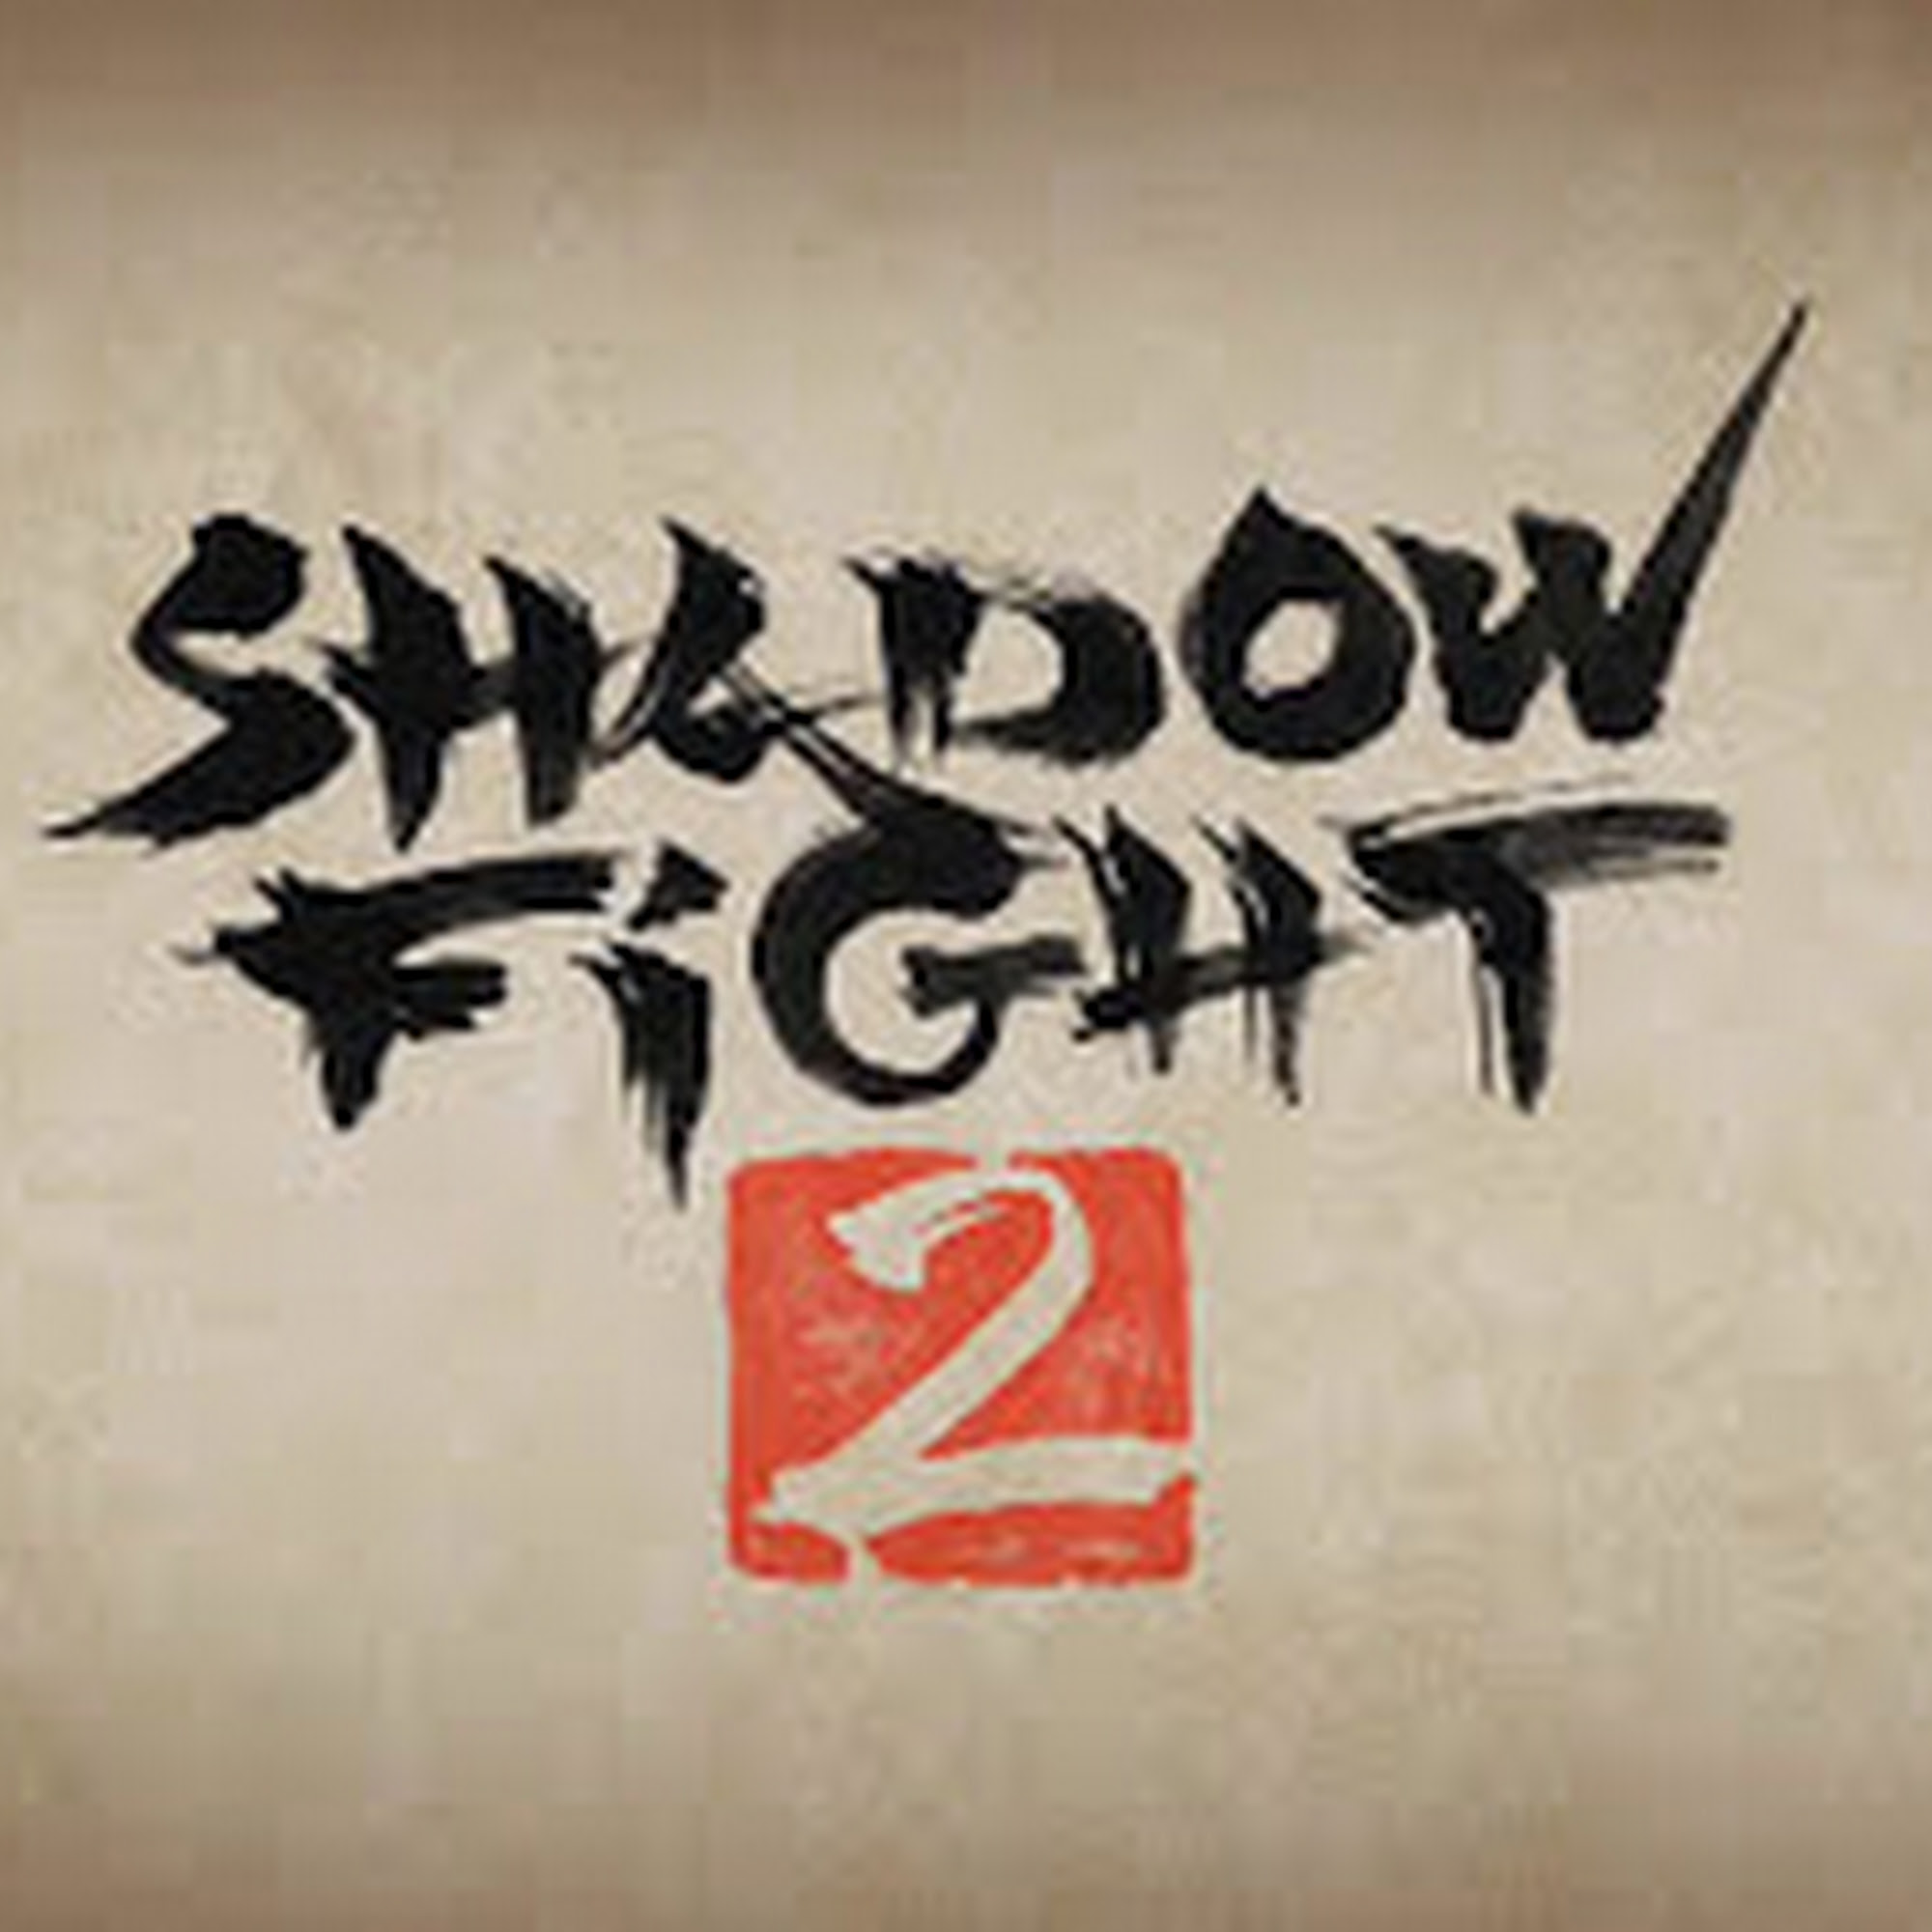 How to Update Modded Shadow Fight 2 and Download Shadow Fight 2 V2.10.0 Update Package